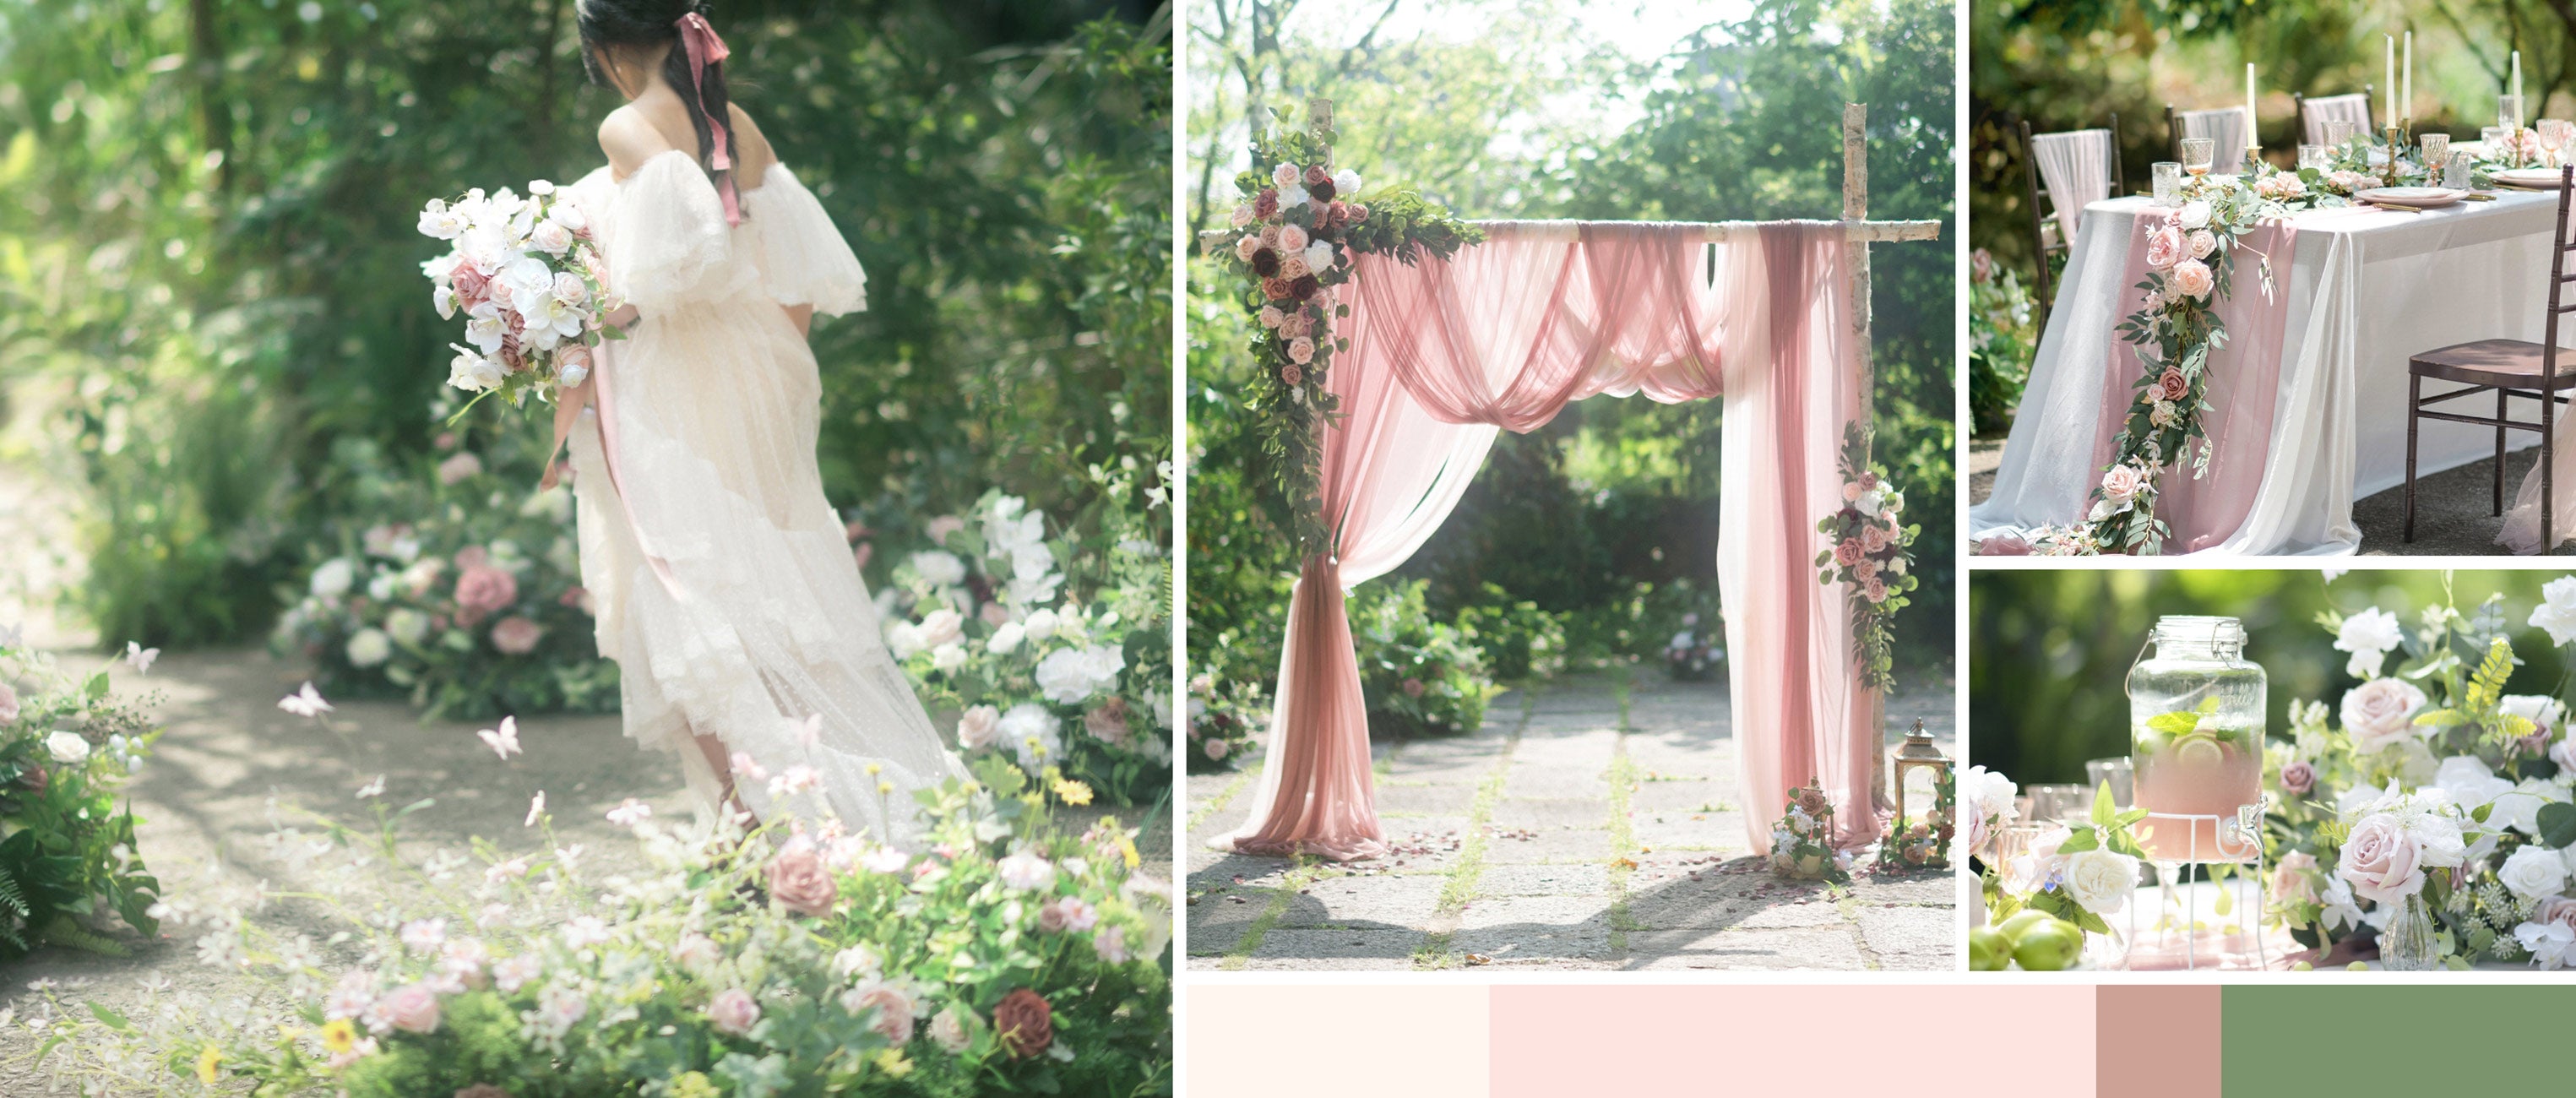 Dusty Rose and Cream Wedding pc banner